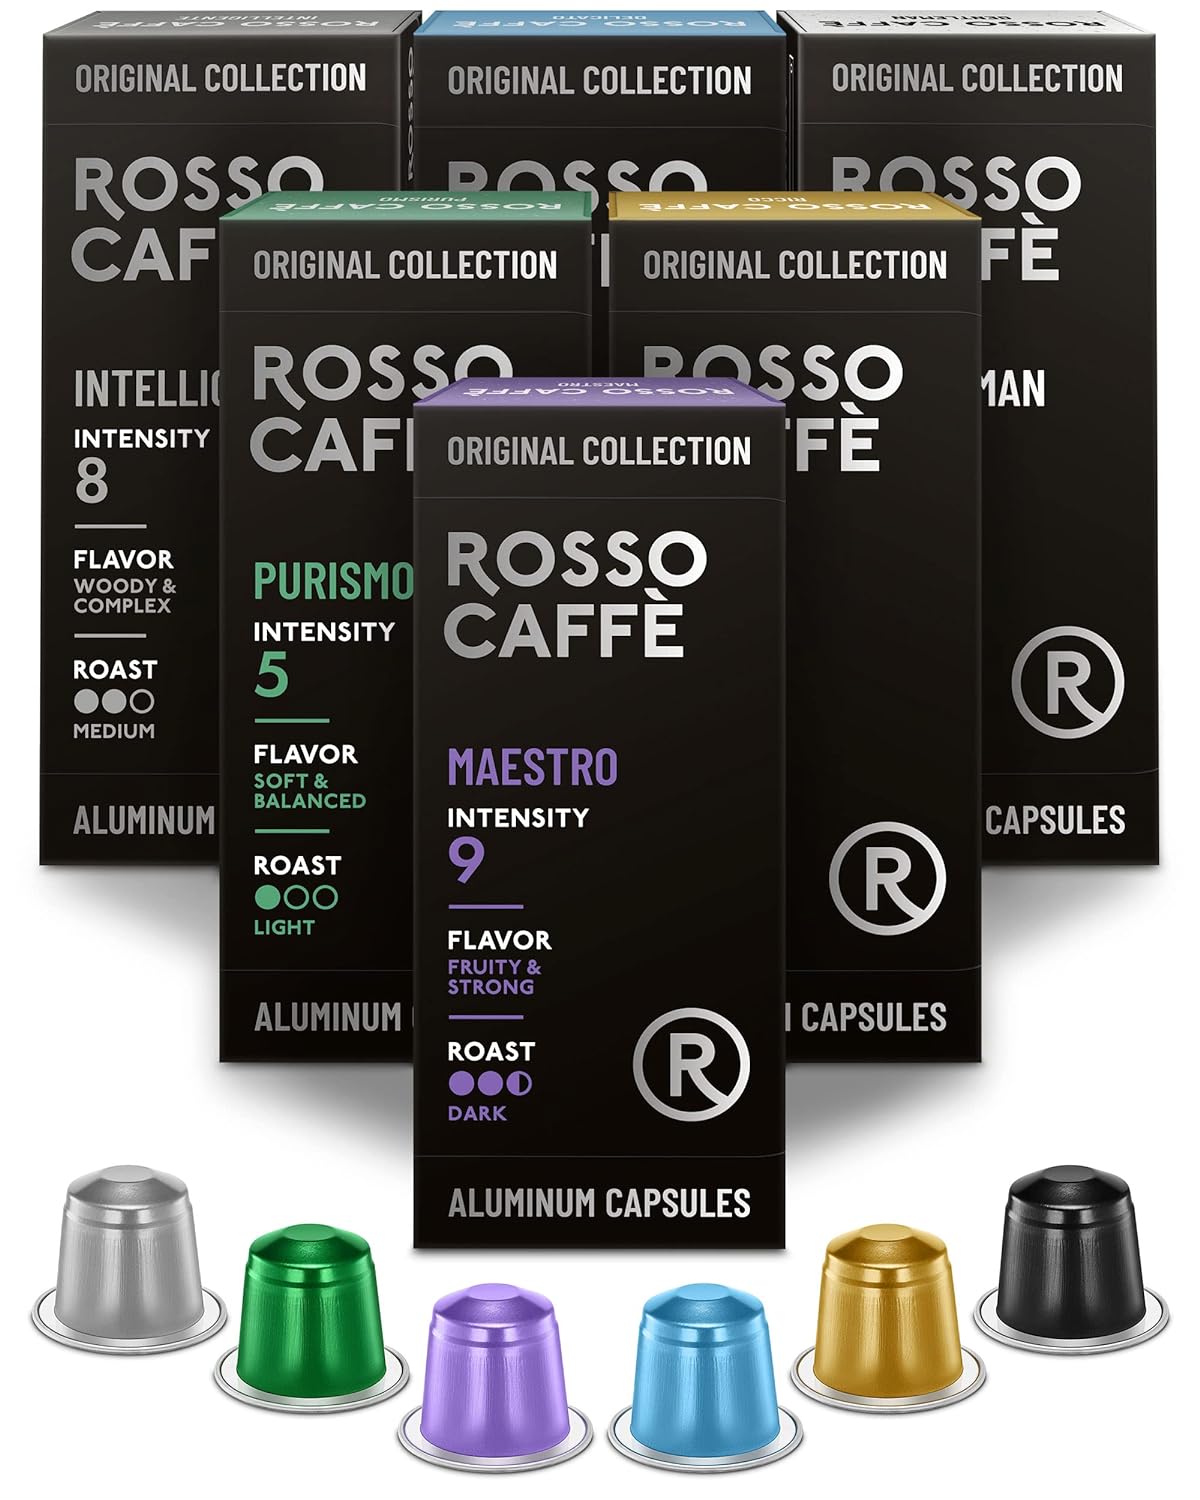 ROSSO CAFFÈ Coffee Capsules - Compatible with Nespresso machines - 60 Aluminum Coffee Pods, 6 Delicious Coffee Flavors - 100% Recyclable Capsules